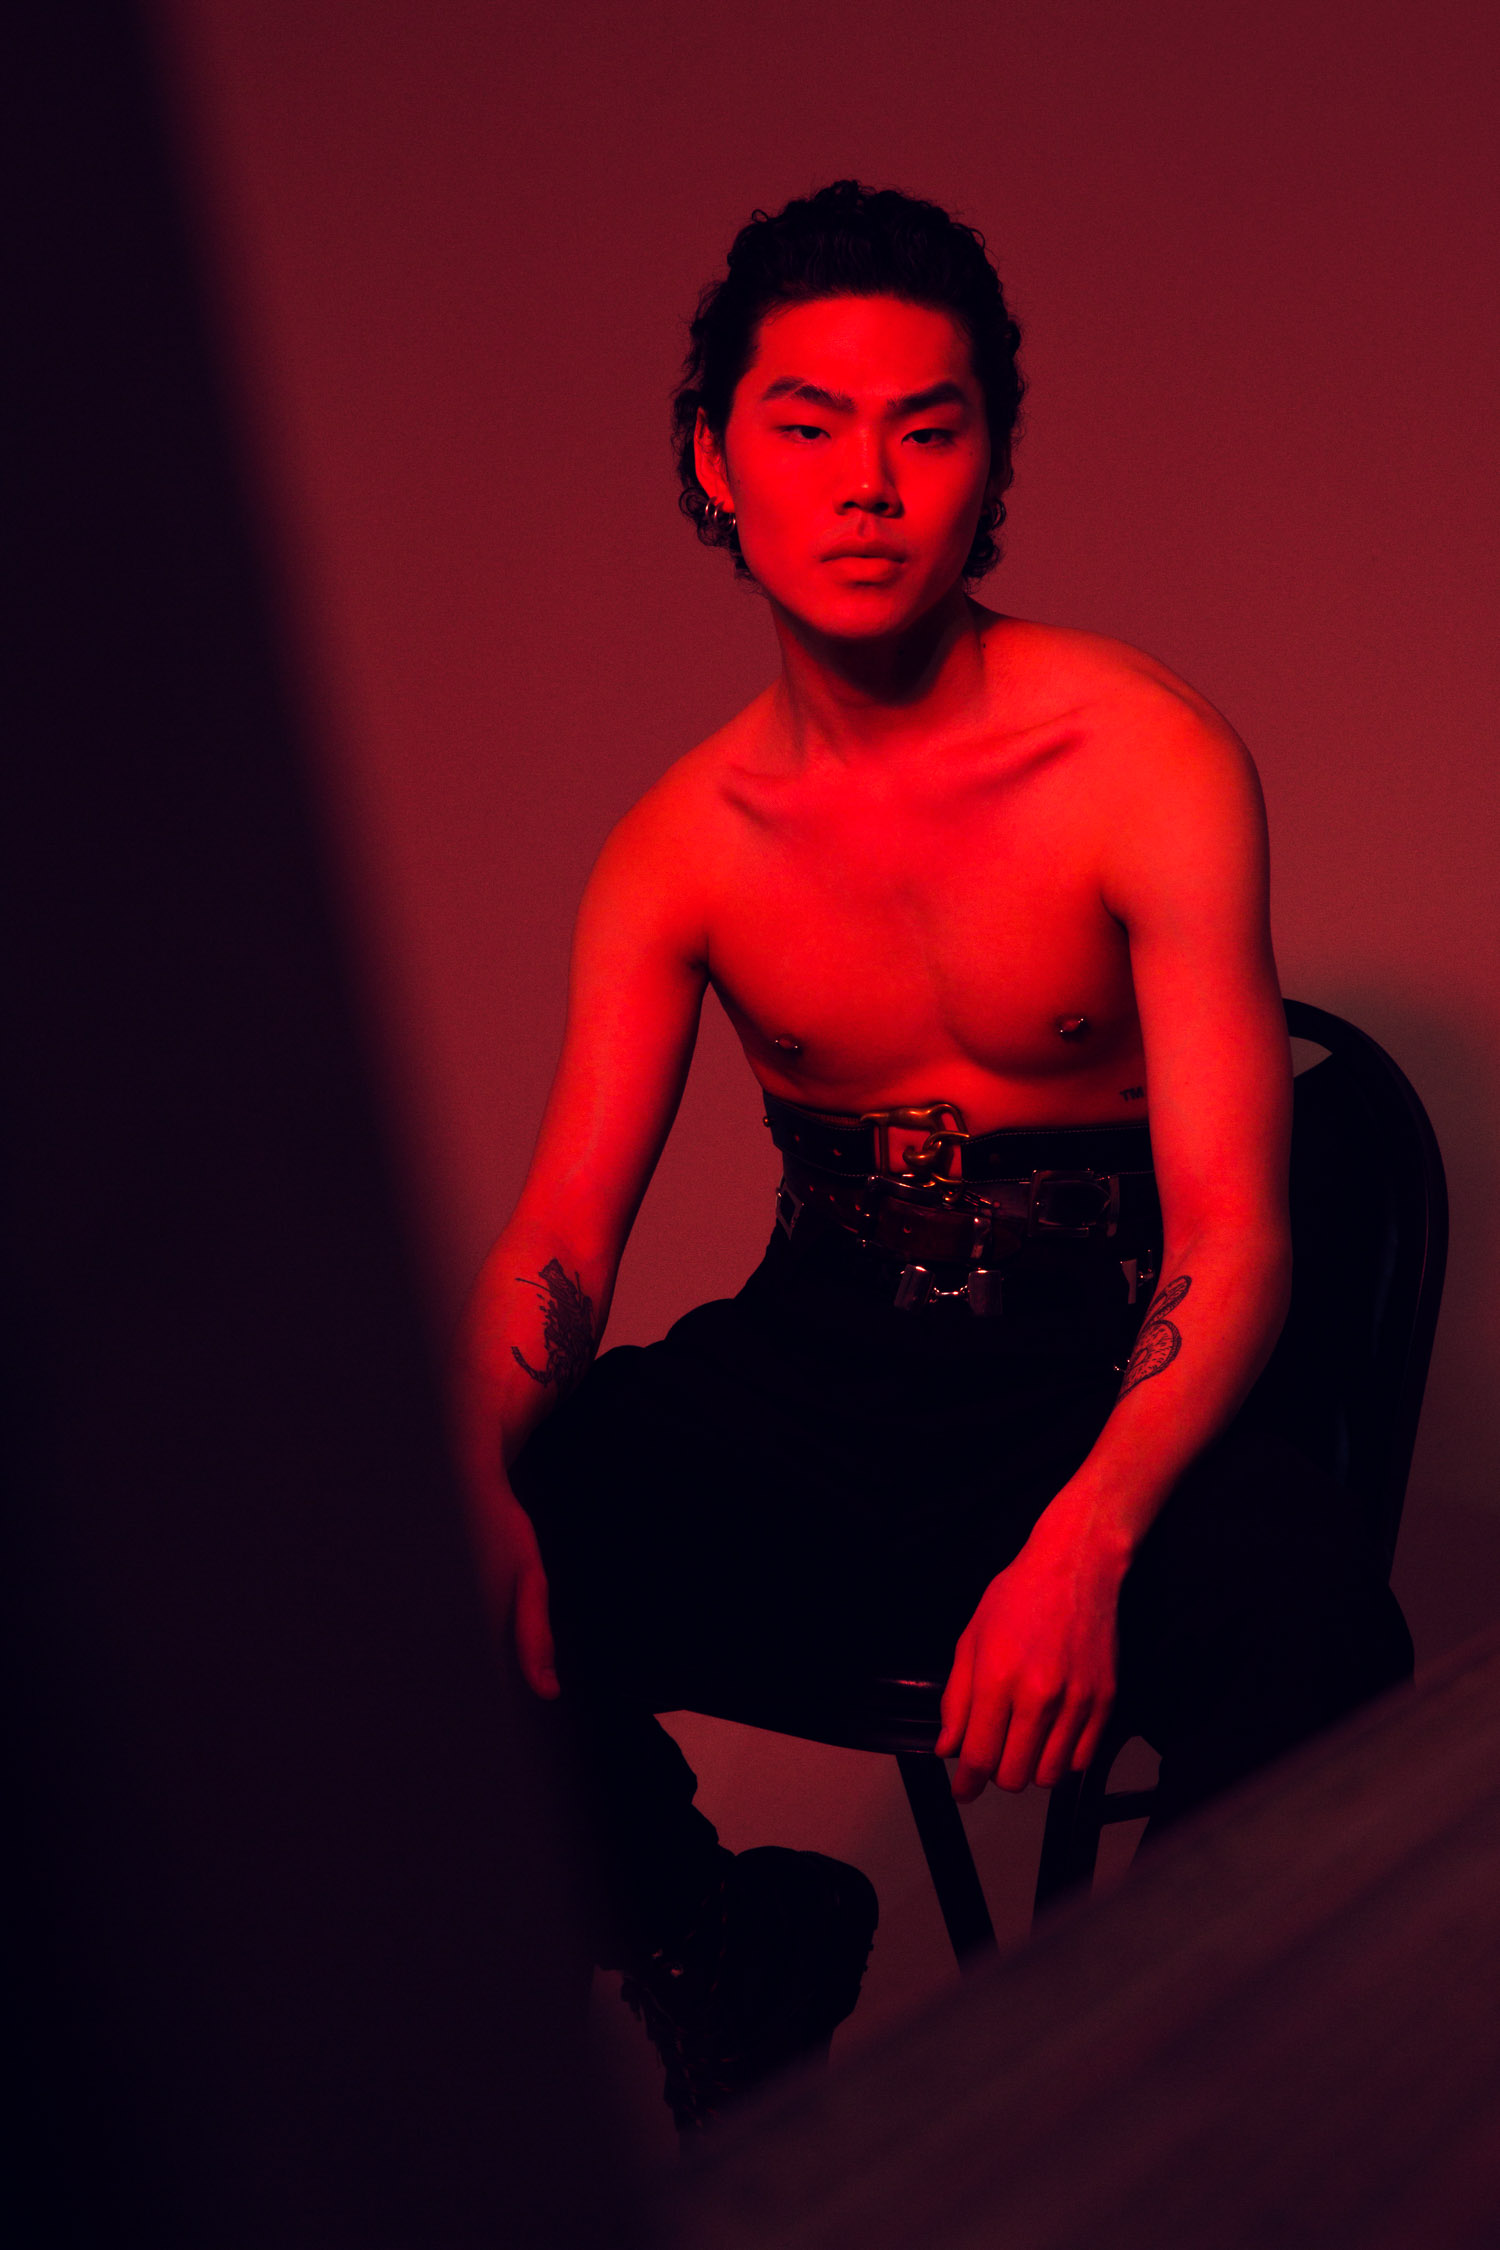 Shirtless man in red light sitting on a chair.